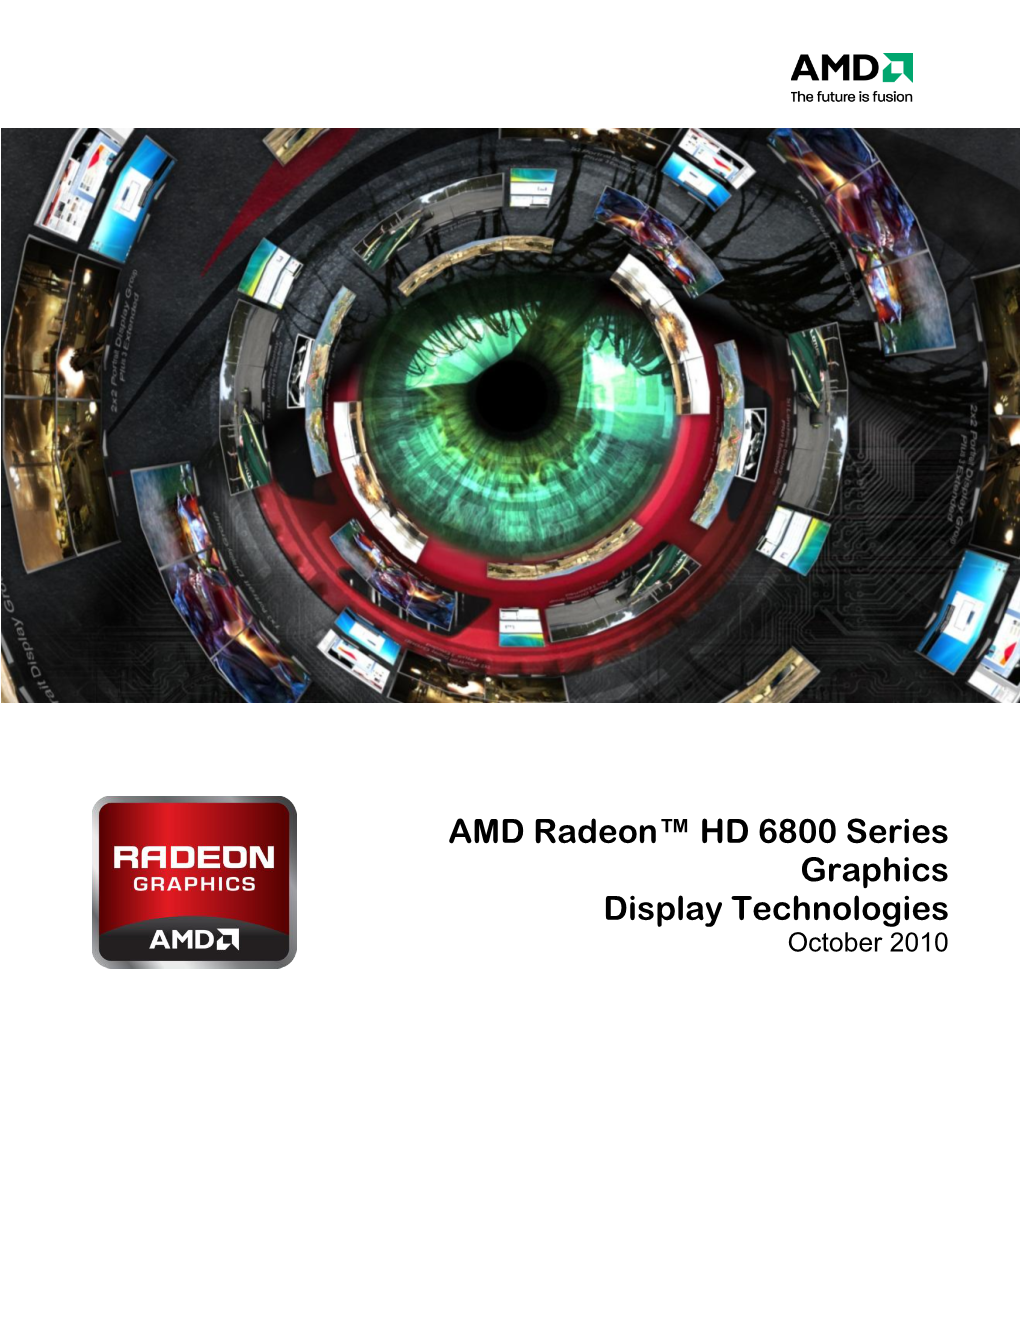 AMD Radeon™ HD 6800 Series Display Technologies 2 Subject to Change Without Notice